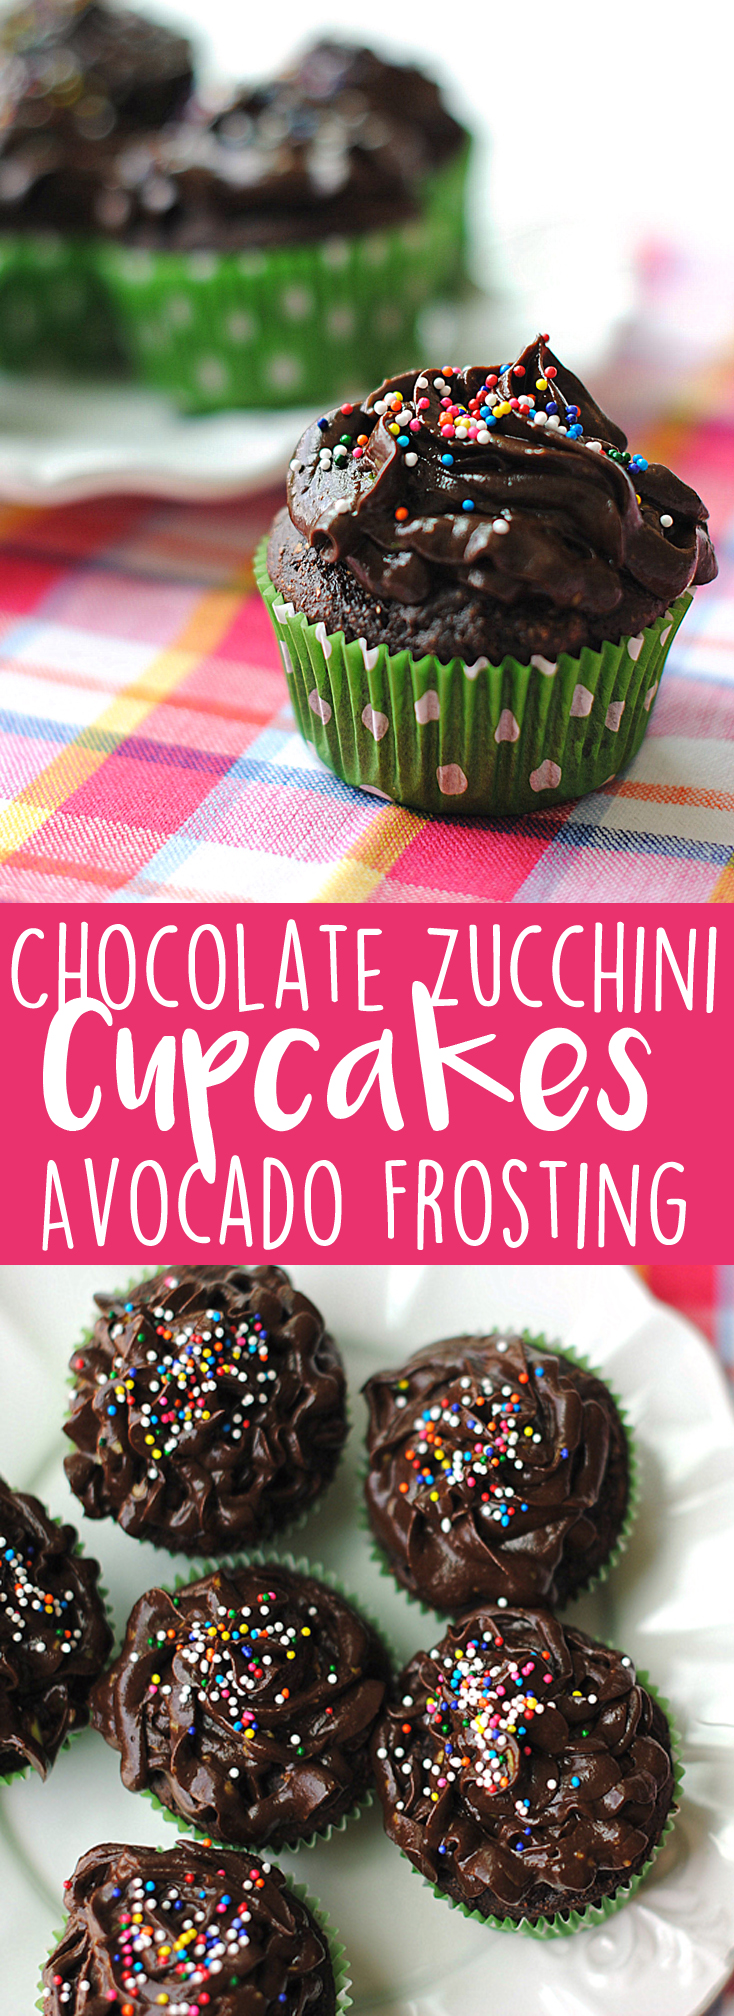 Chocolate Zucchini Cupcakes with Avocado Frosting | Eat Yourself Skinny